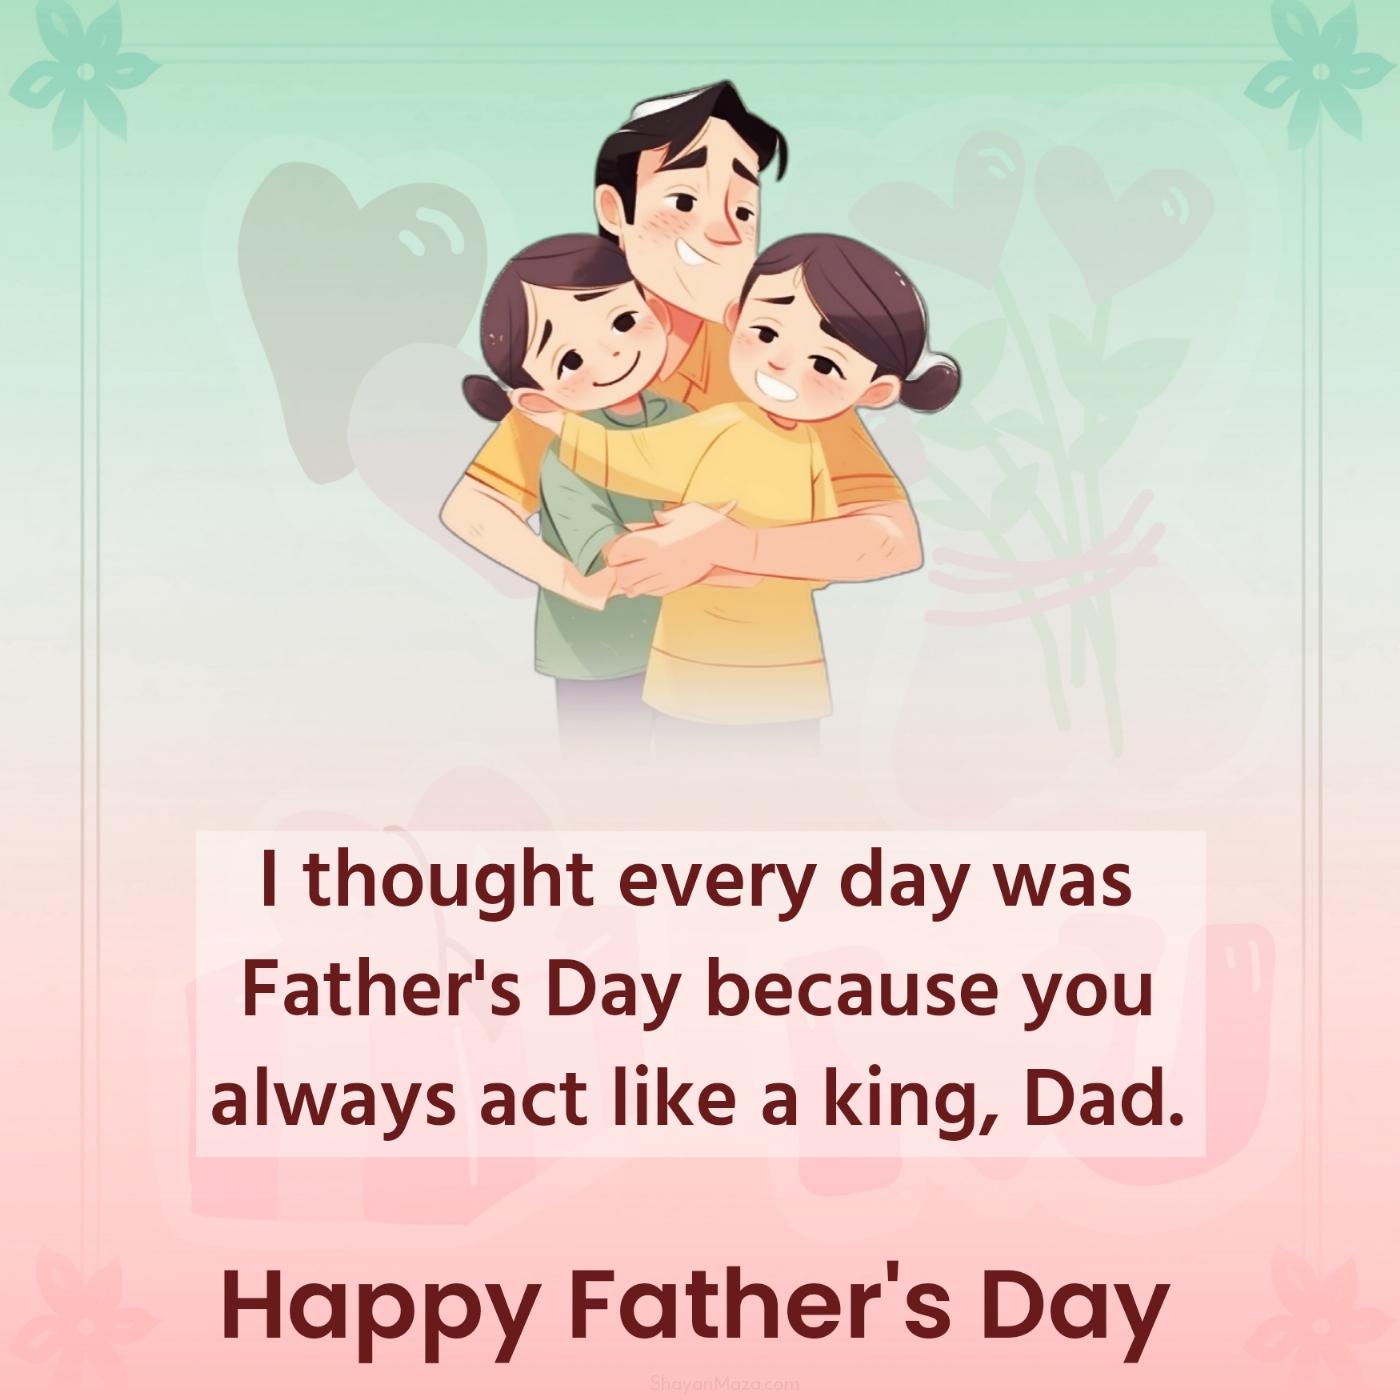 I thought every day was Father's Day because you always act